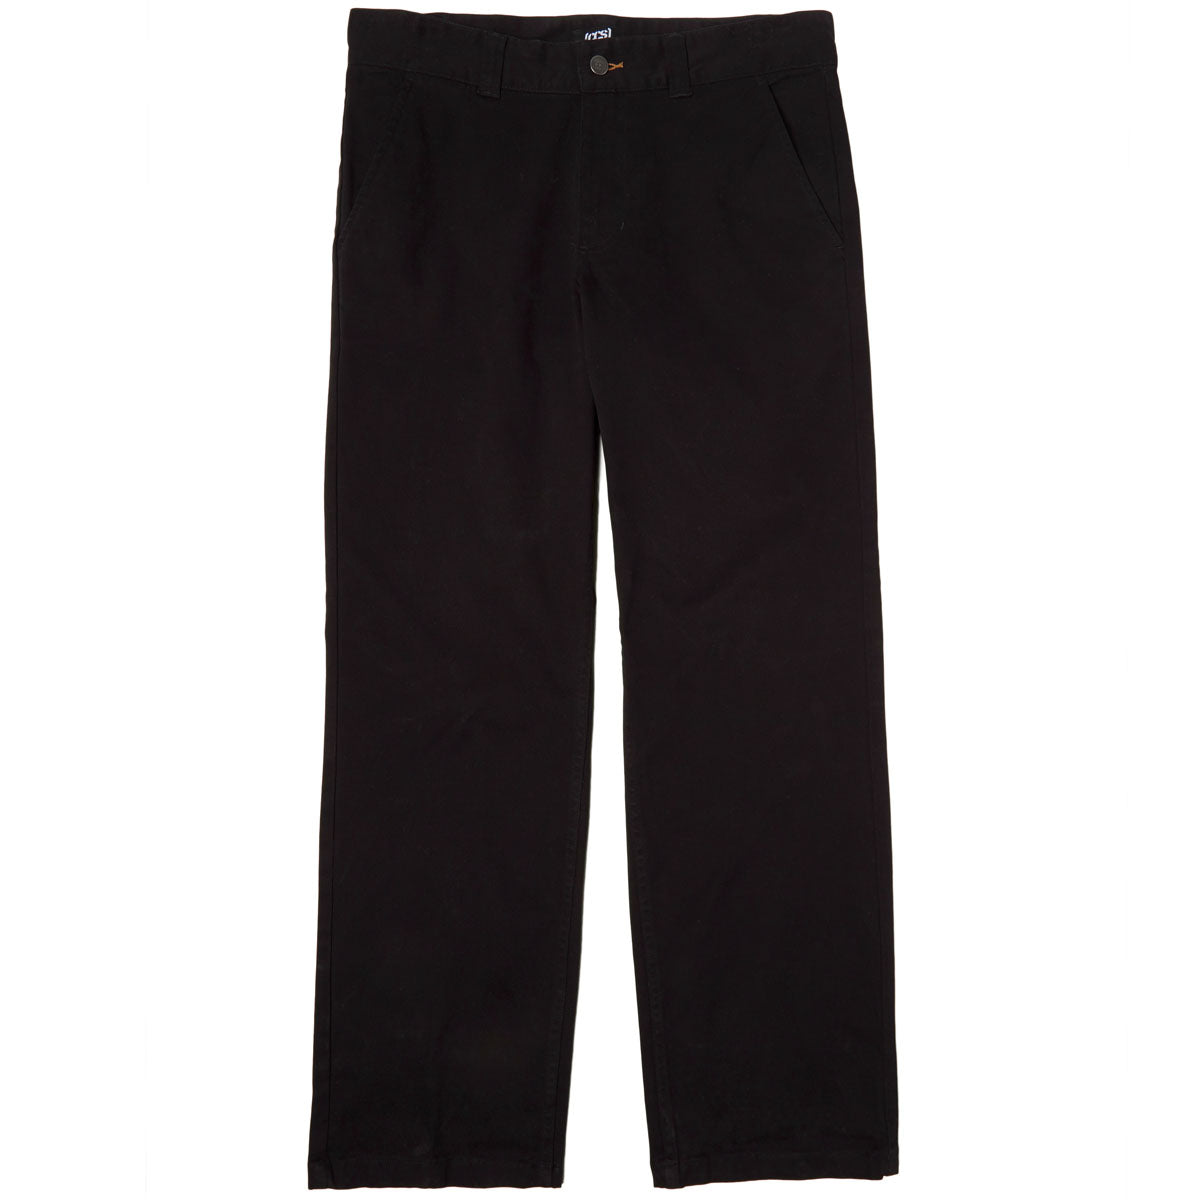 CCS Standard Plus Relaxed Chino Pants - Black image 5